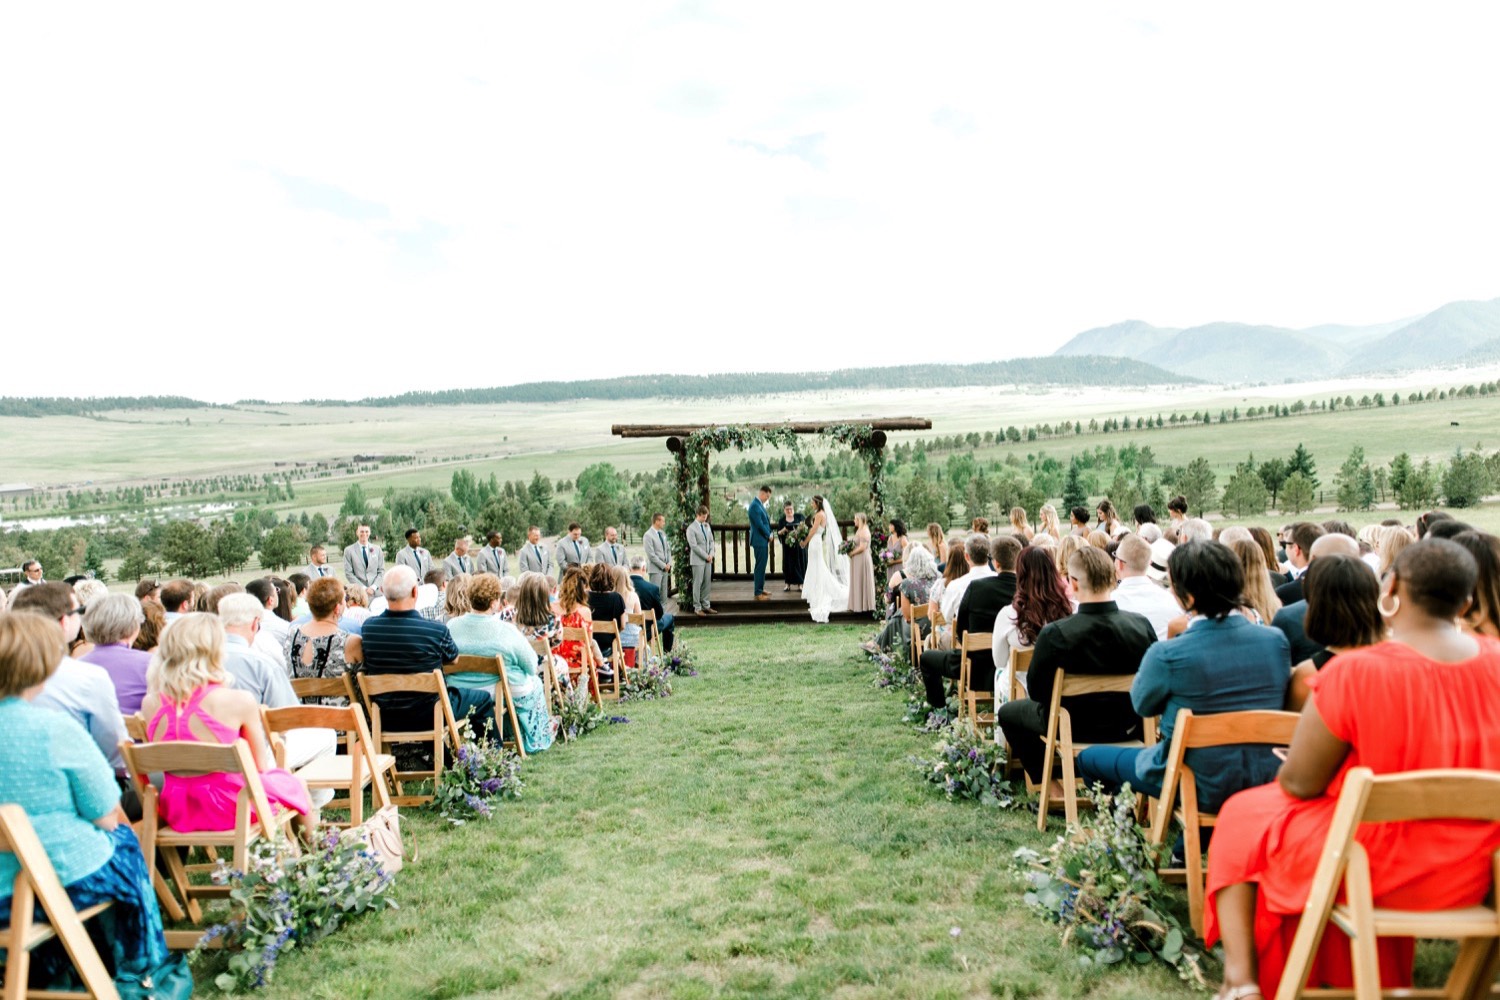 The beautiful outdoor ceremony site of Spruce Mountain Ranch